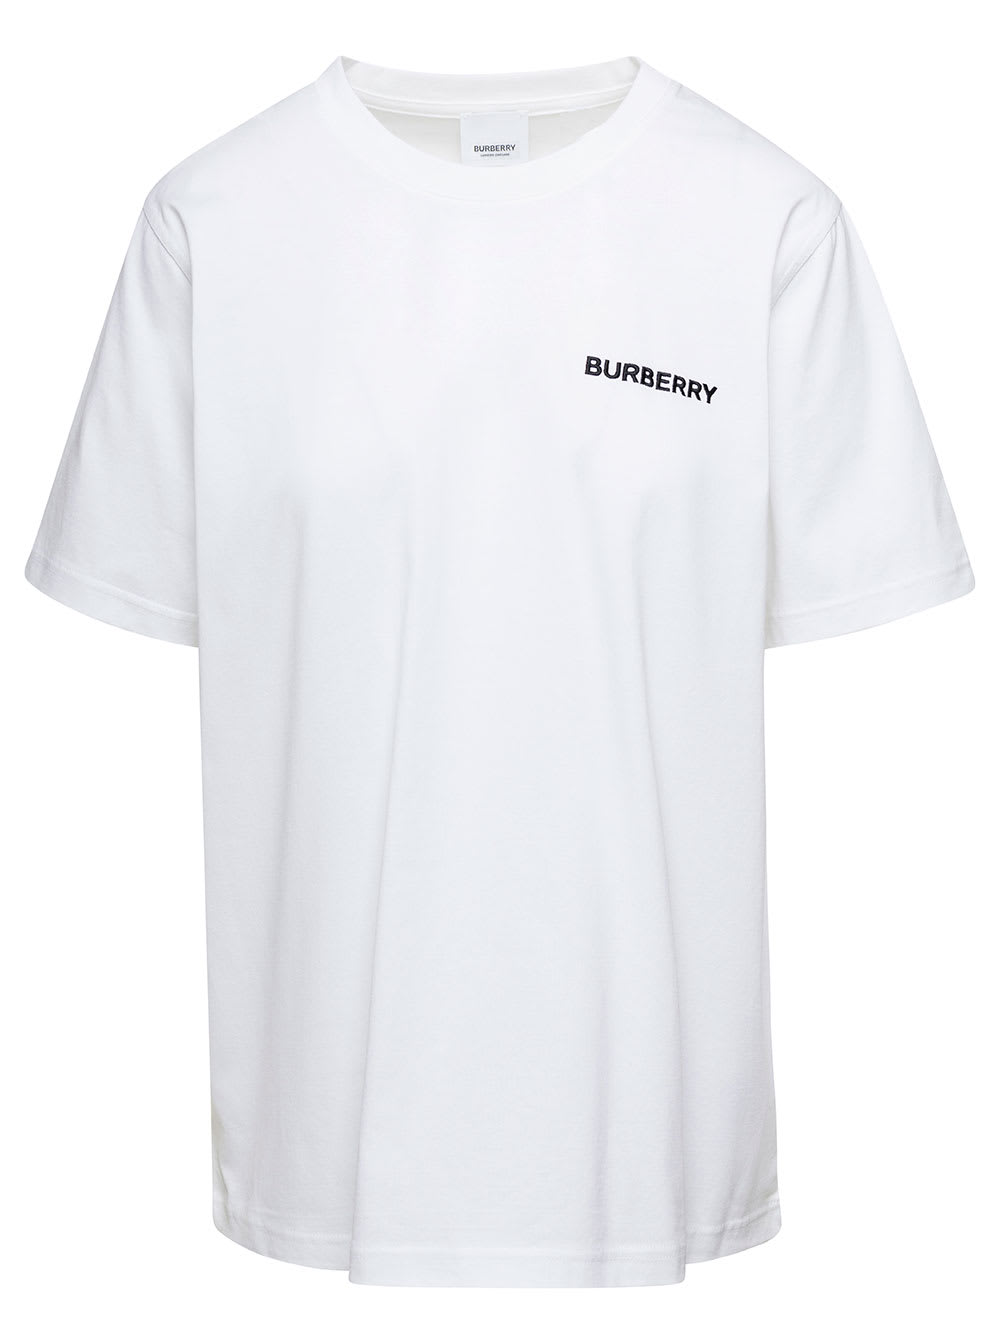 BURBERRY WHITE T-SHIRT WITH LOGO ON THE FRON AND TB LOGO PRINT ON THE BACK IN COTTON WOMAN